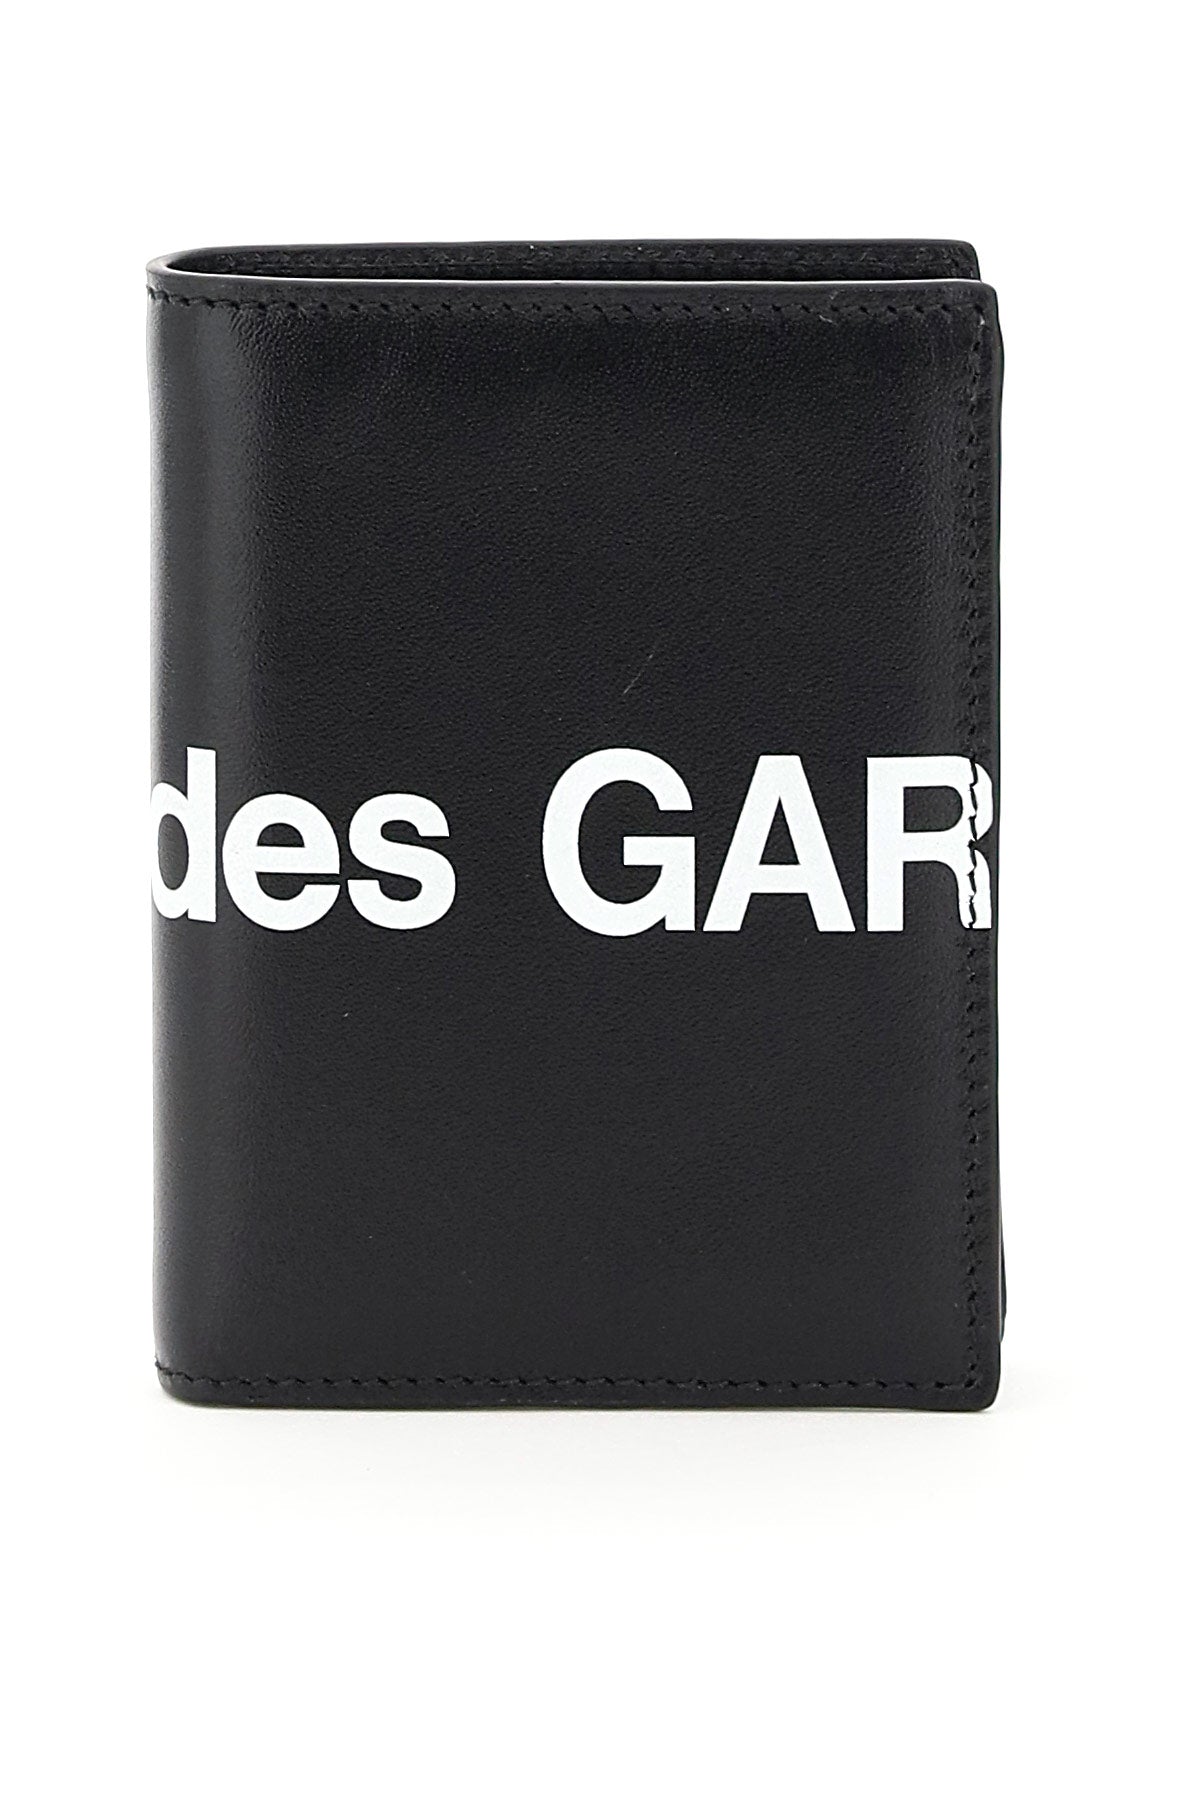 Comme des garcons wallet small bifold wallet with huge logo-0